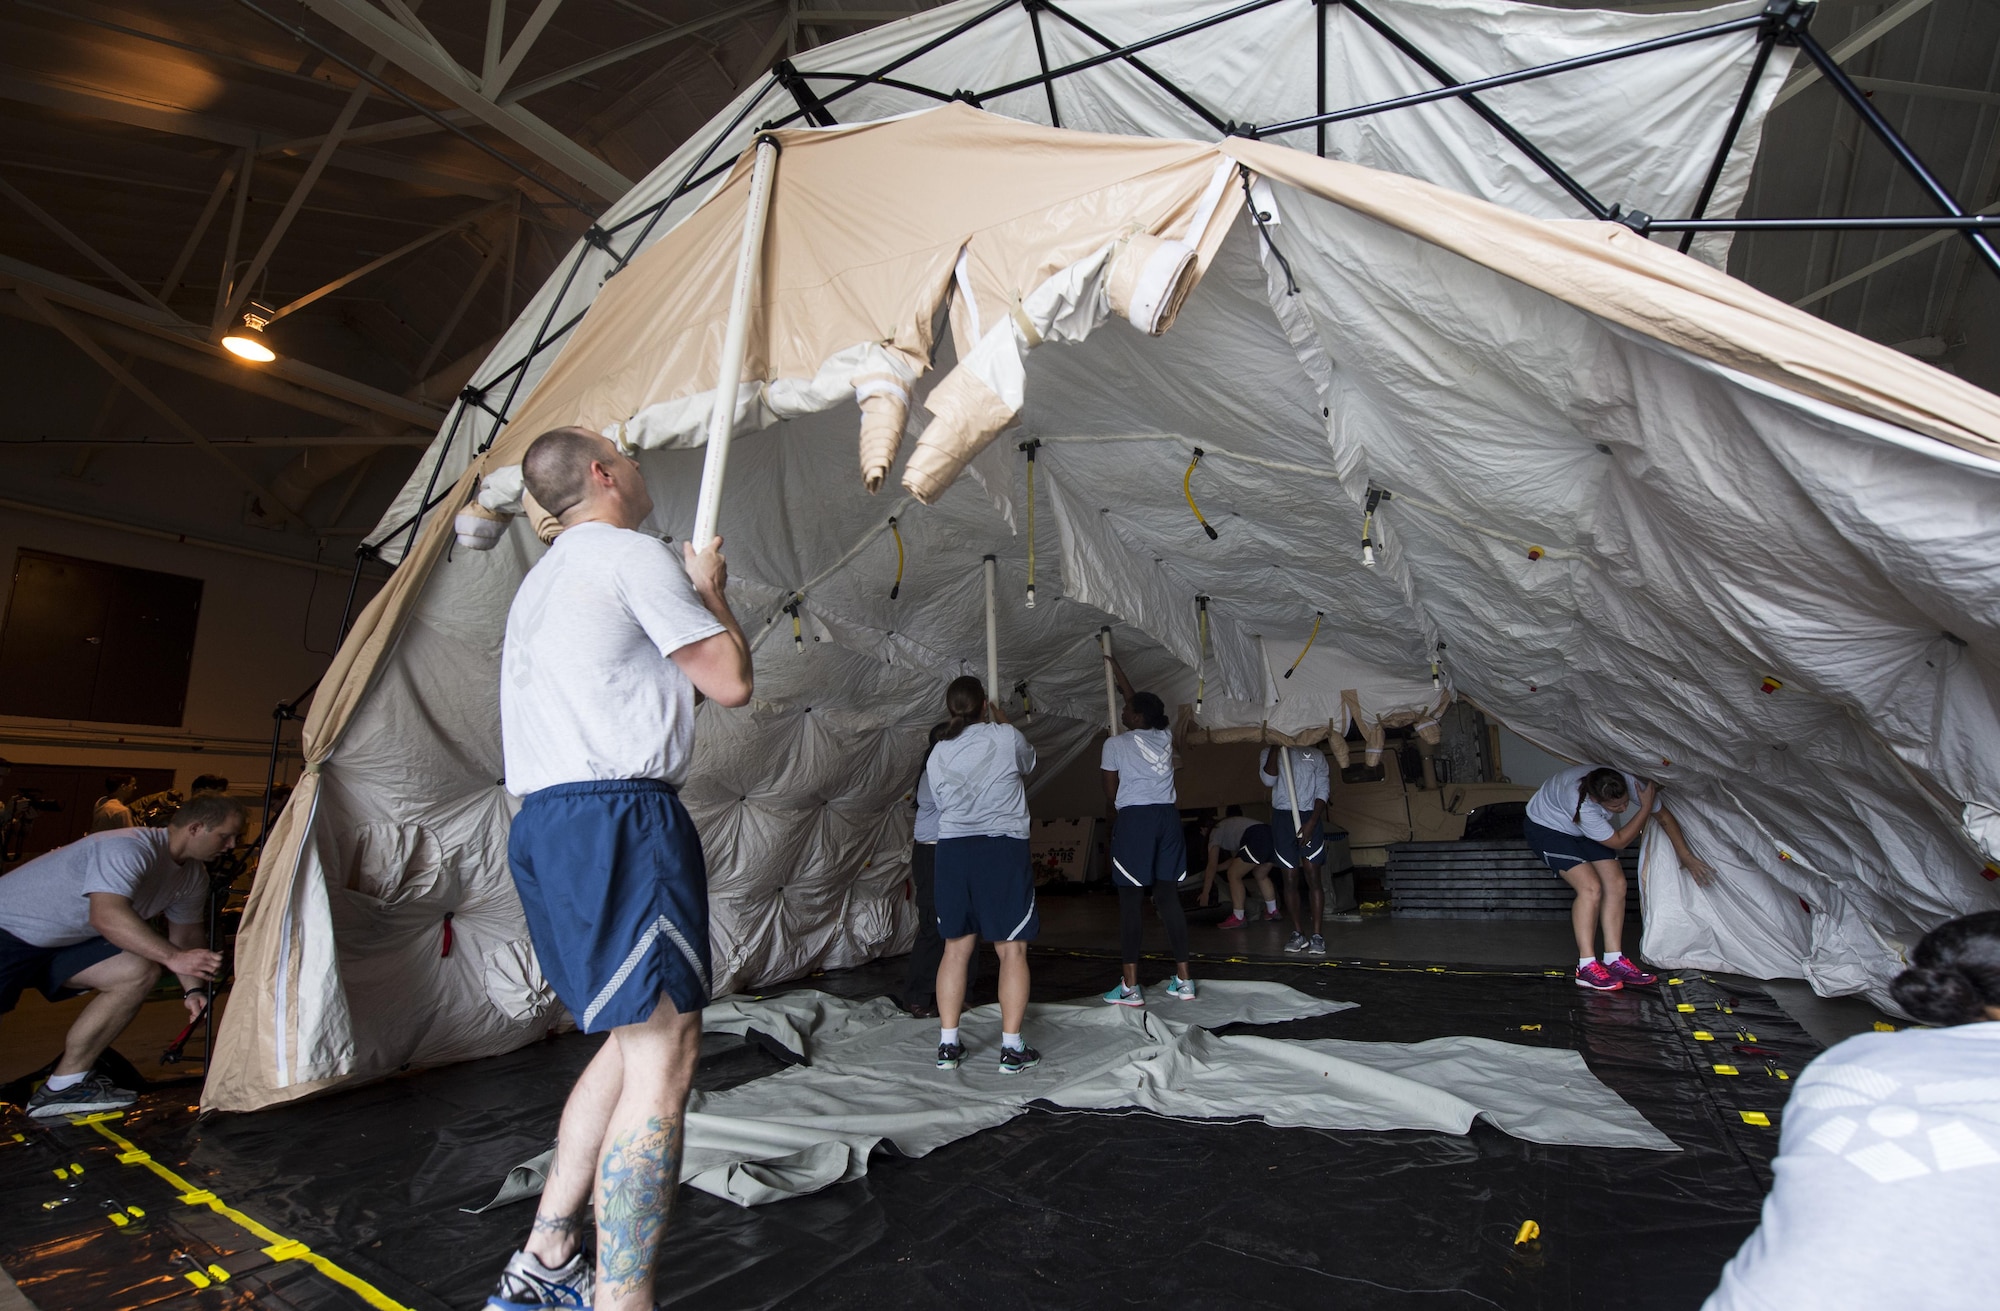 628th Medical Group members set-up a patient decontamination tent as part of a patient decontamination exercise drill here Sept. 15, 2016. Participants were required to ensure the shelter is operational within 15 minutes in preparation to receive and decontaminate patients in the tent. 